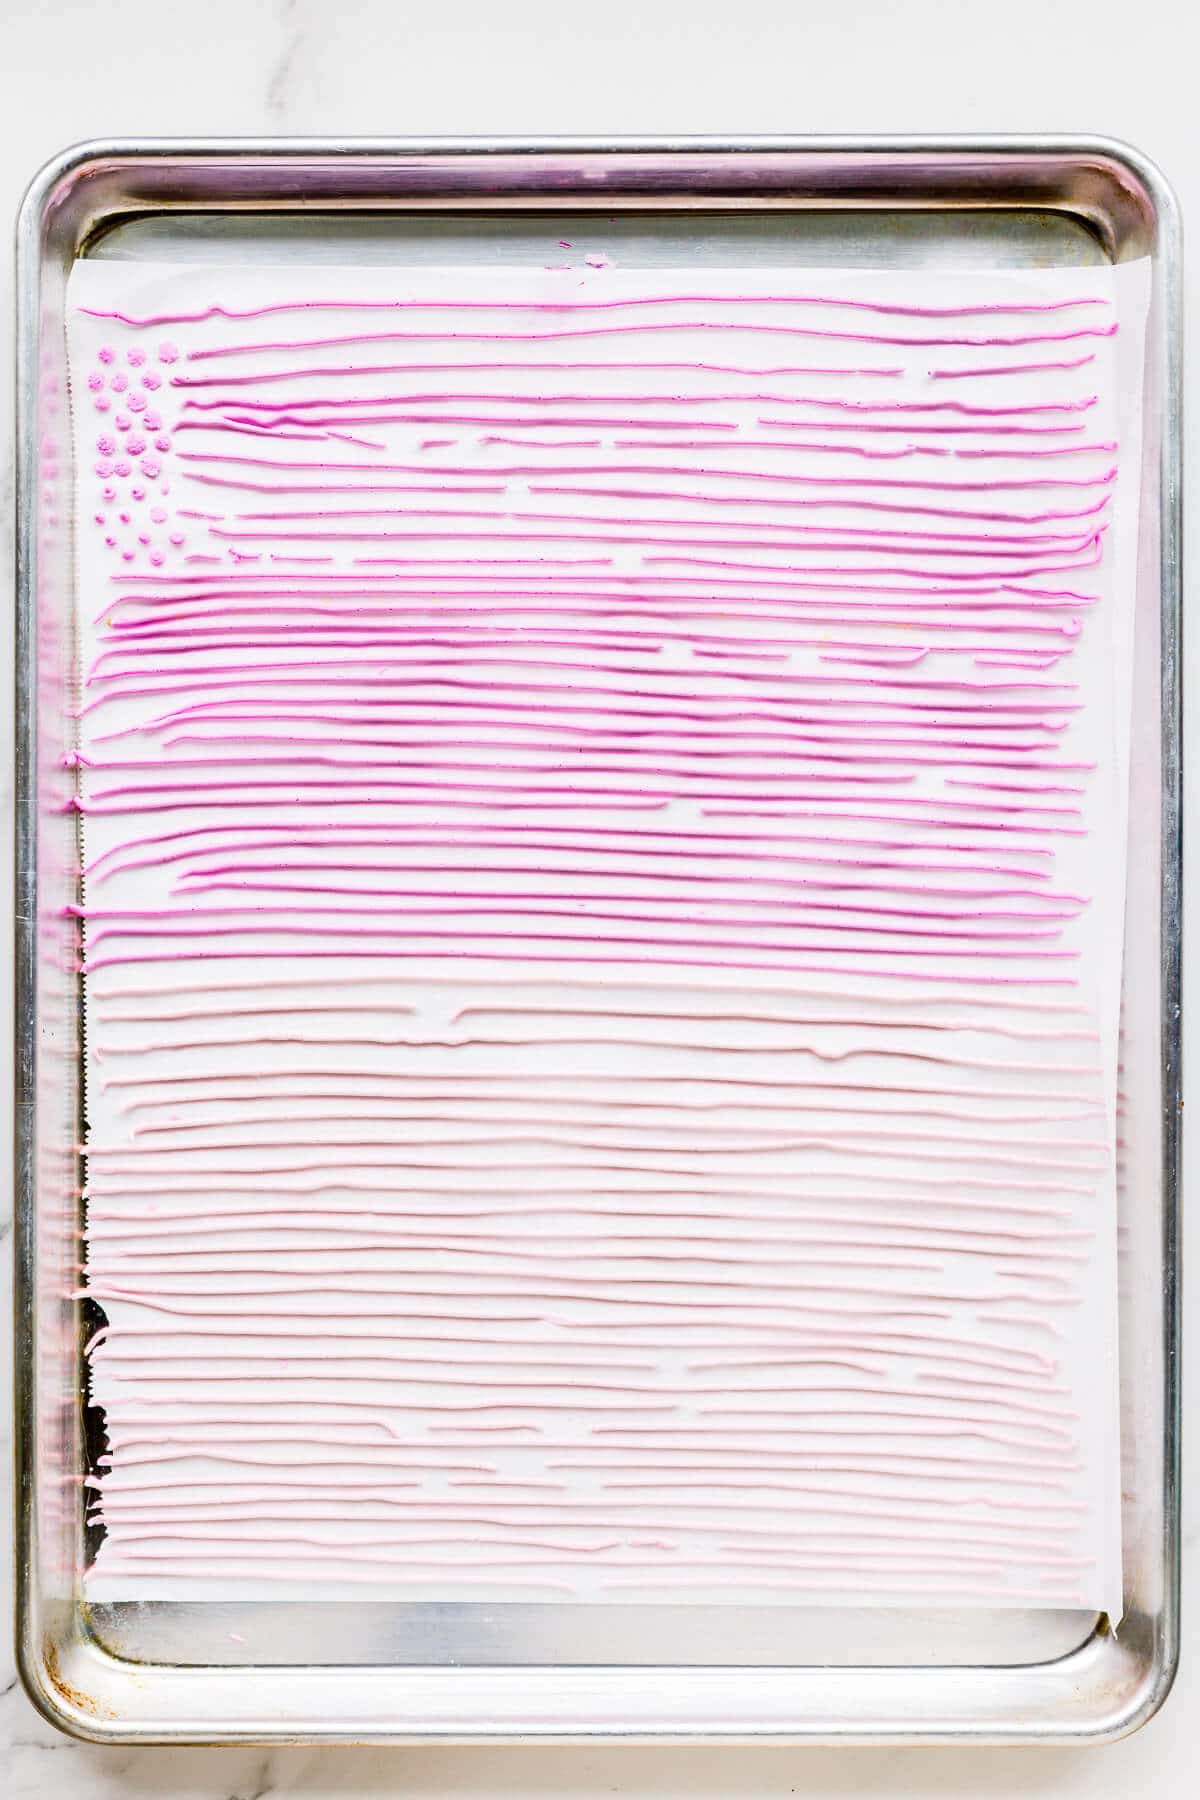 Pink royal icing piped in lines on parchment paper to make homemade sprinkles.